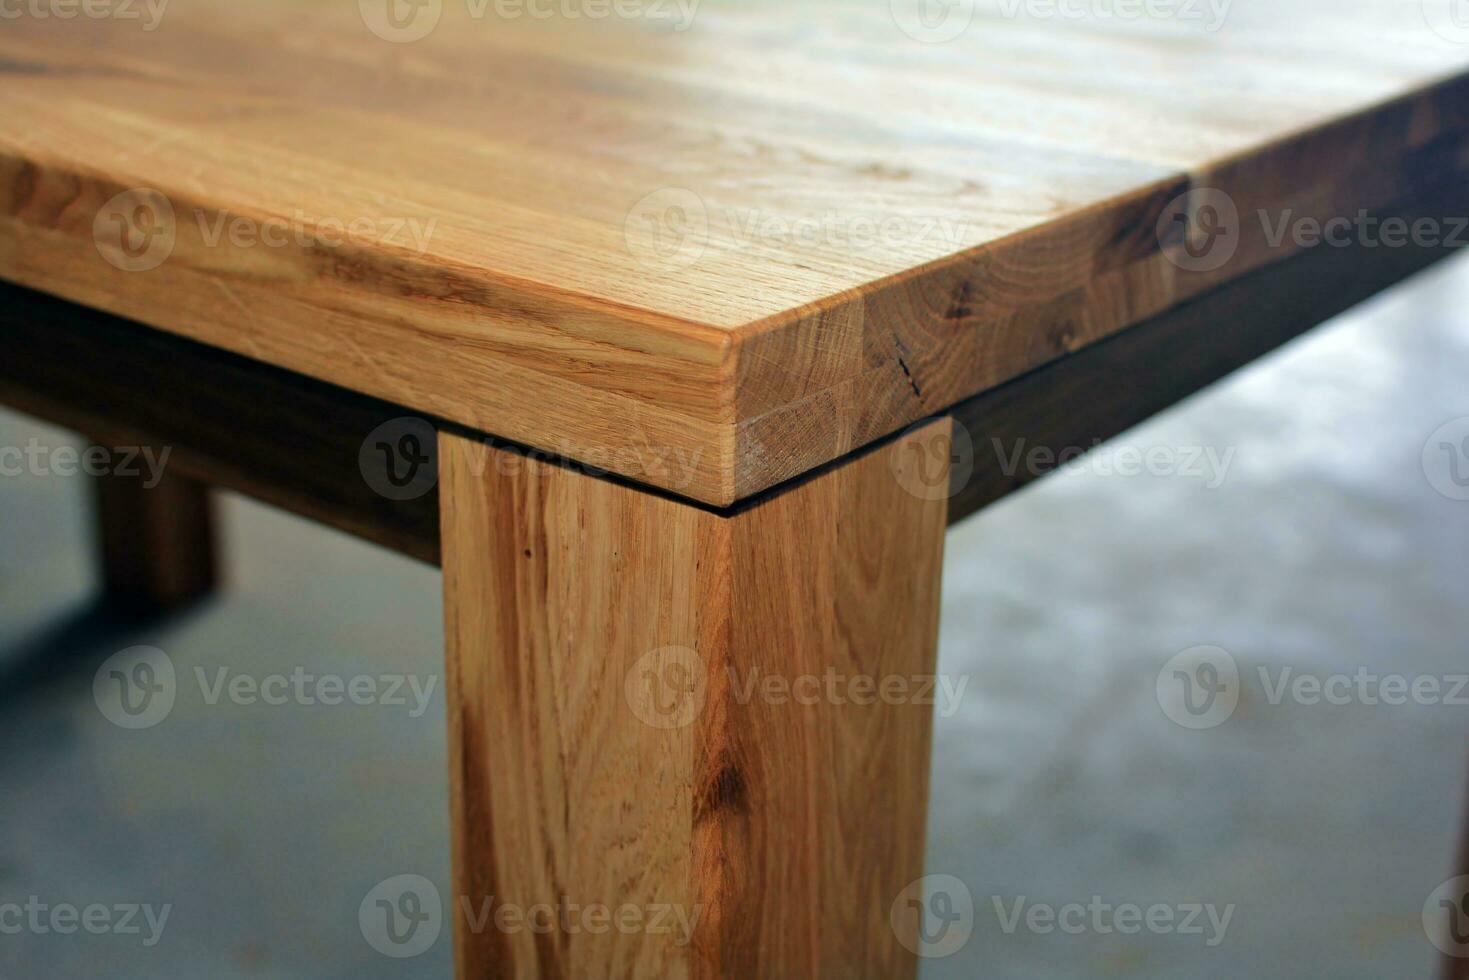 Wooden furniture surface. Natural wood close view photo background